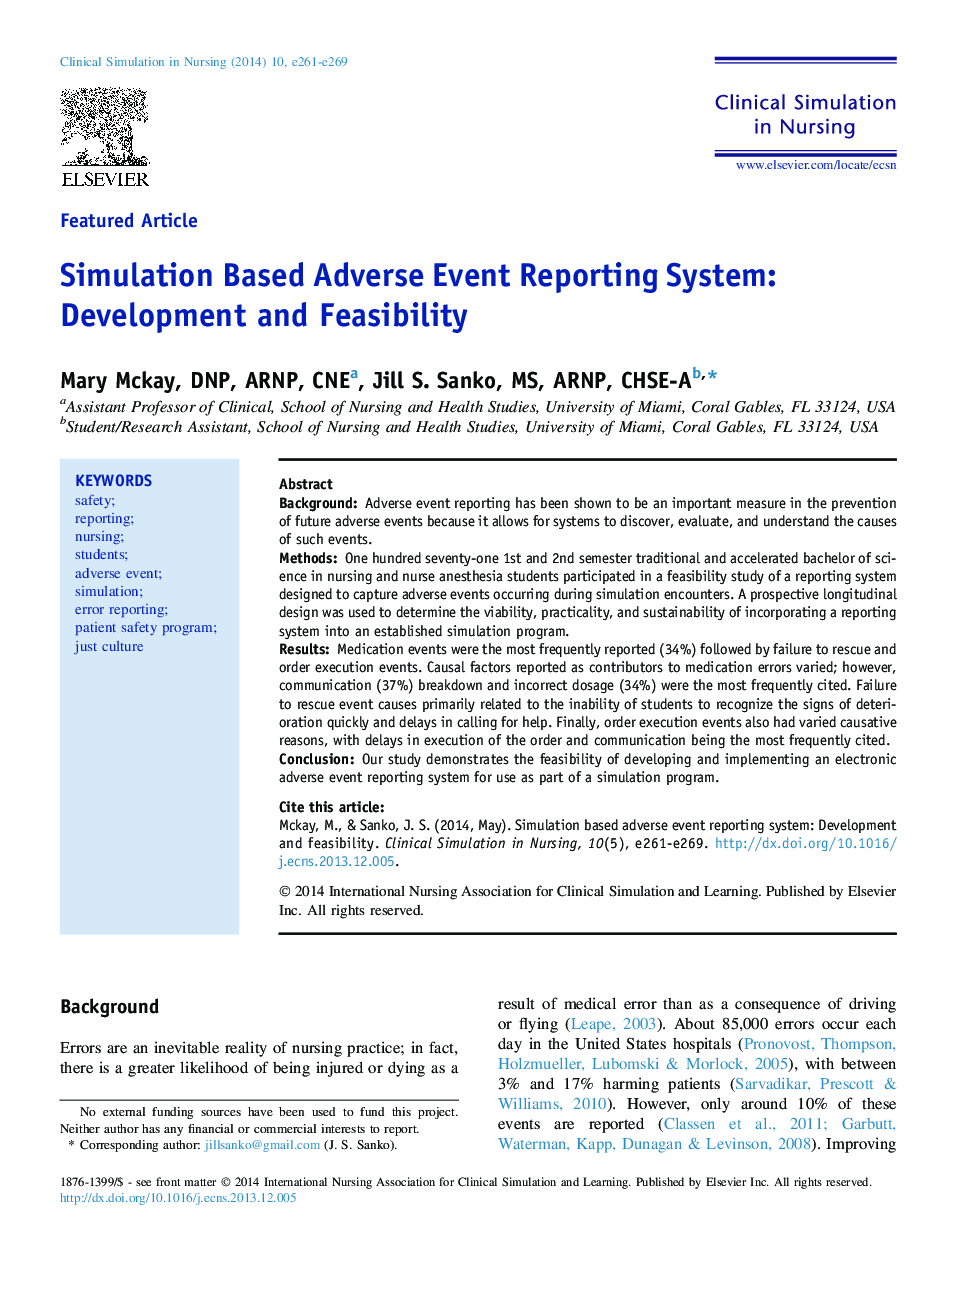 Simulation Based Adverse Event Reporting System: Development and Feasibility